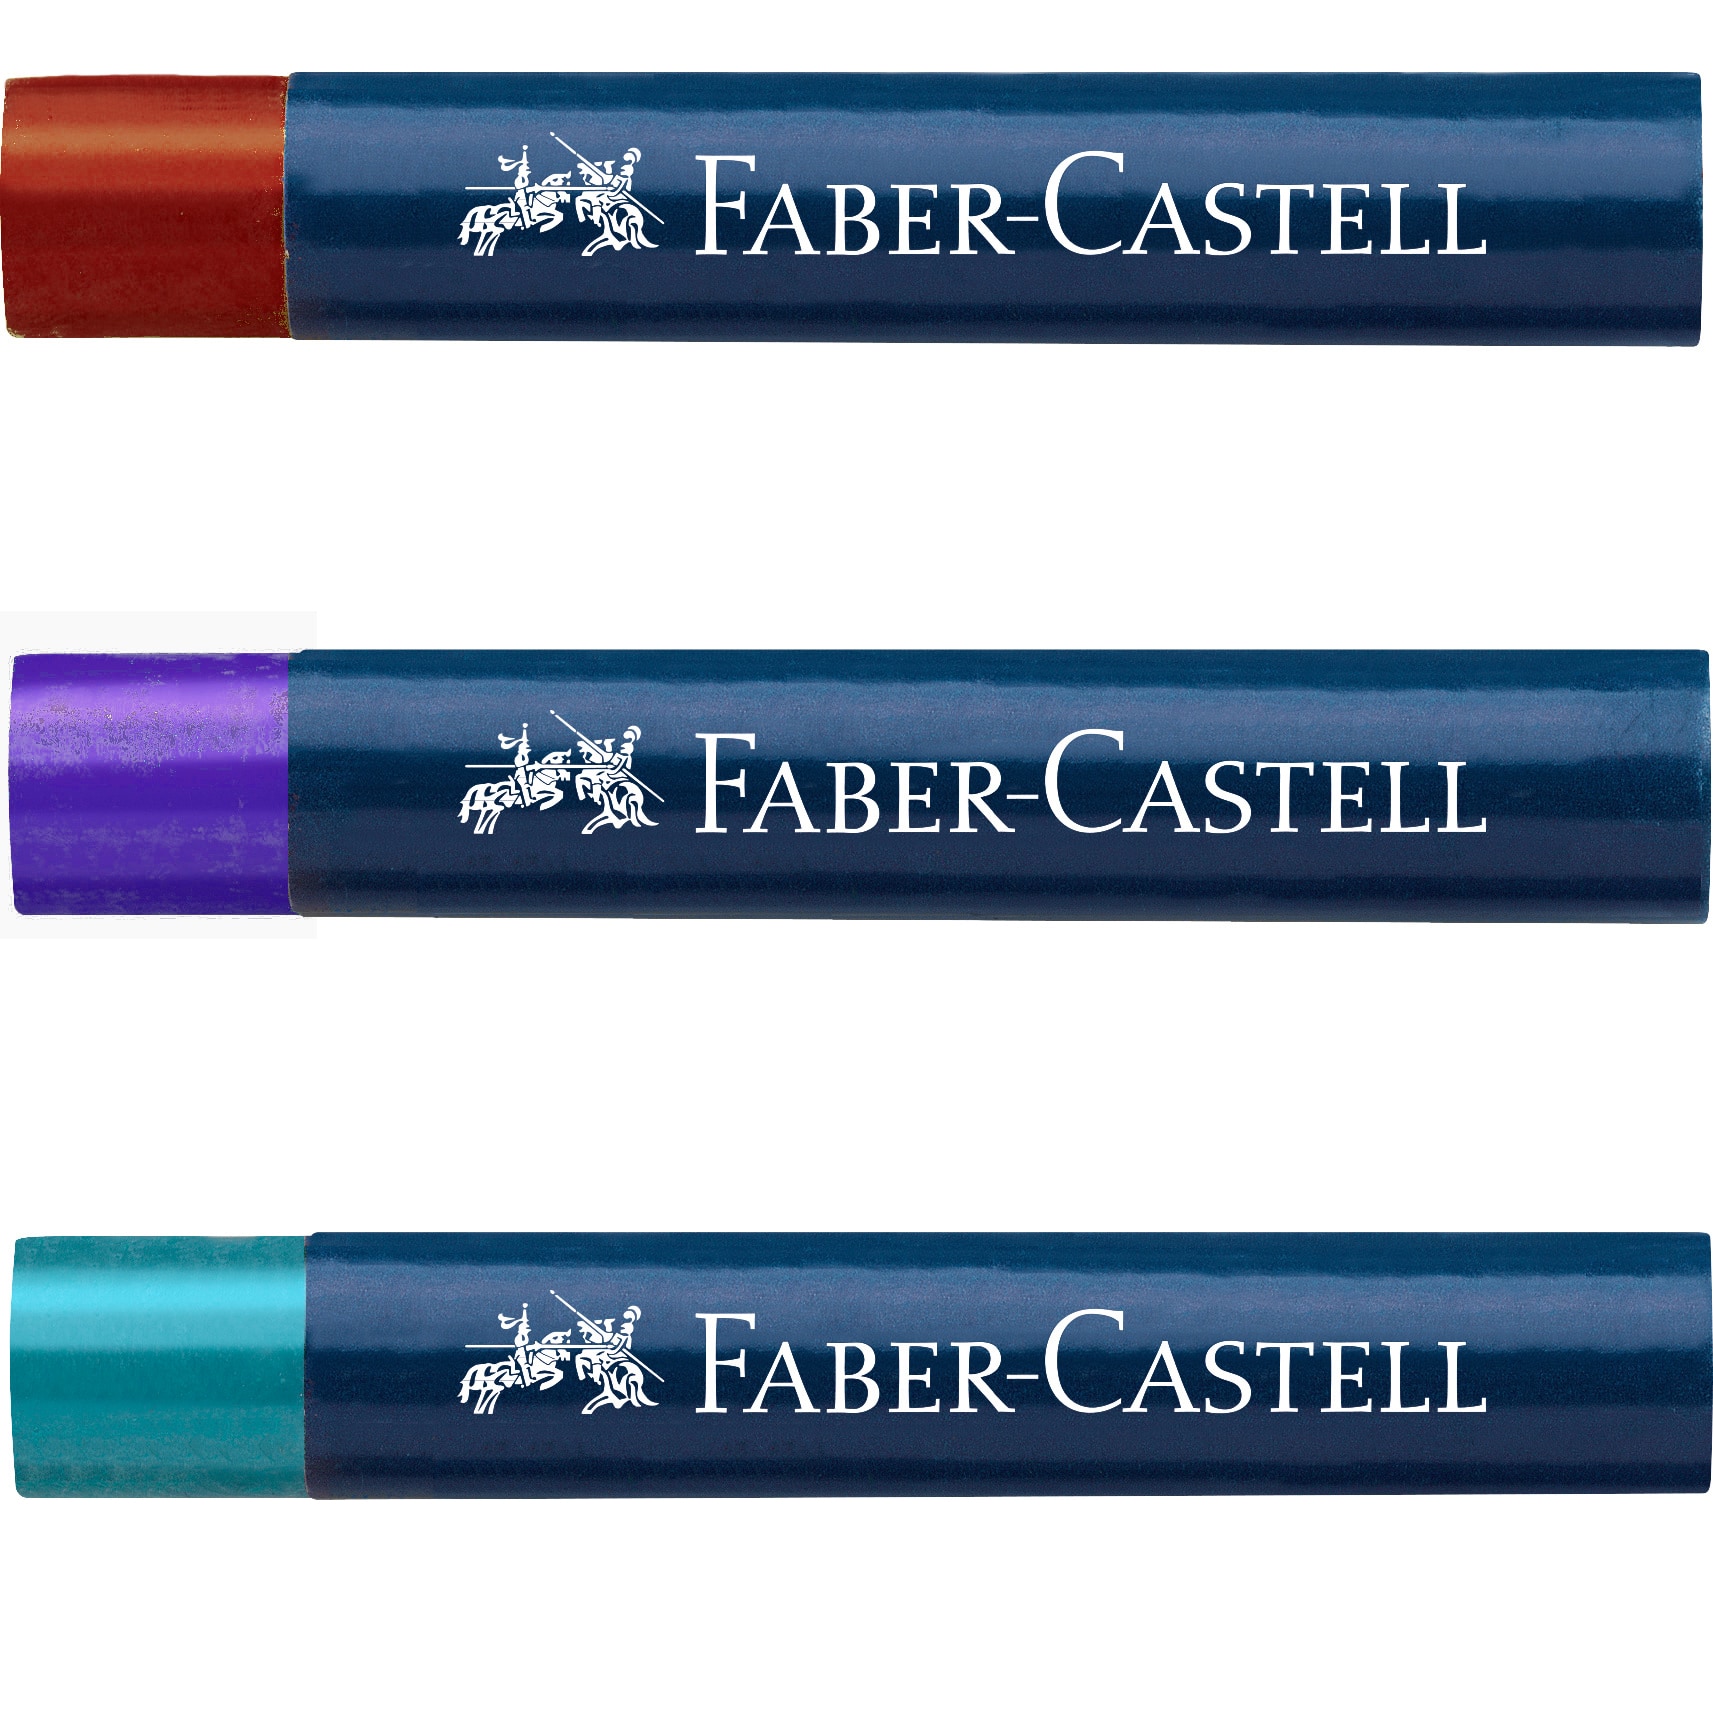 Faber Castell Large Kneaded Erasers